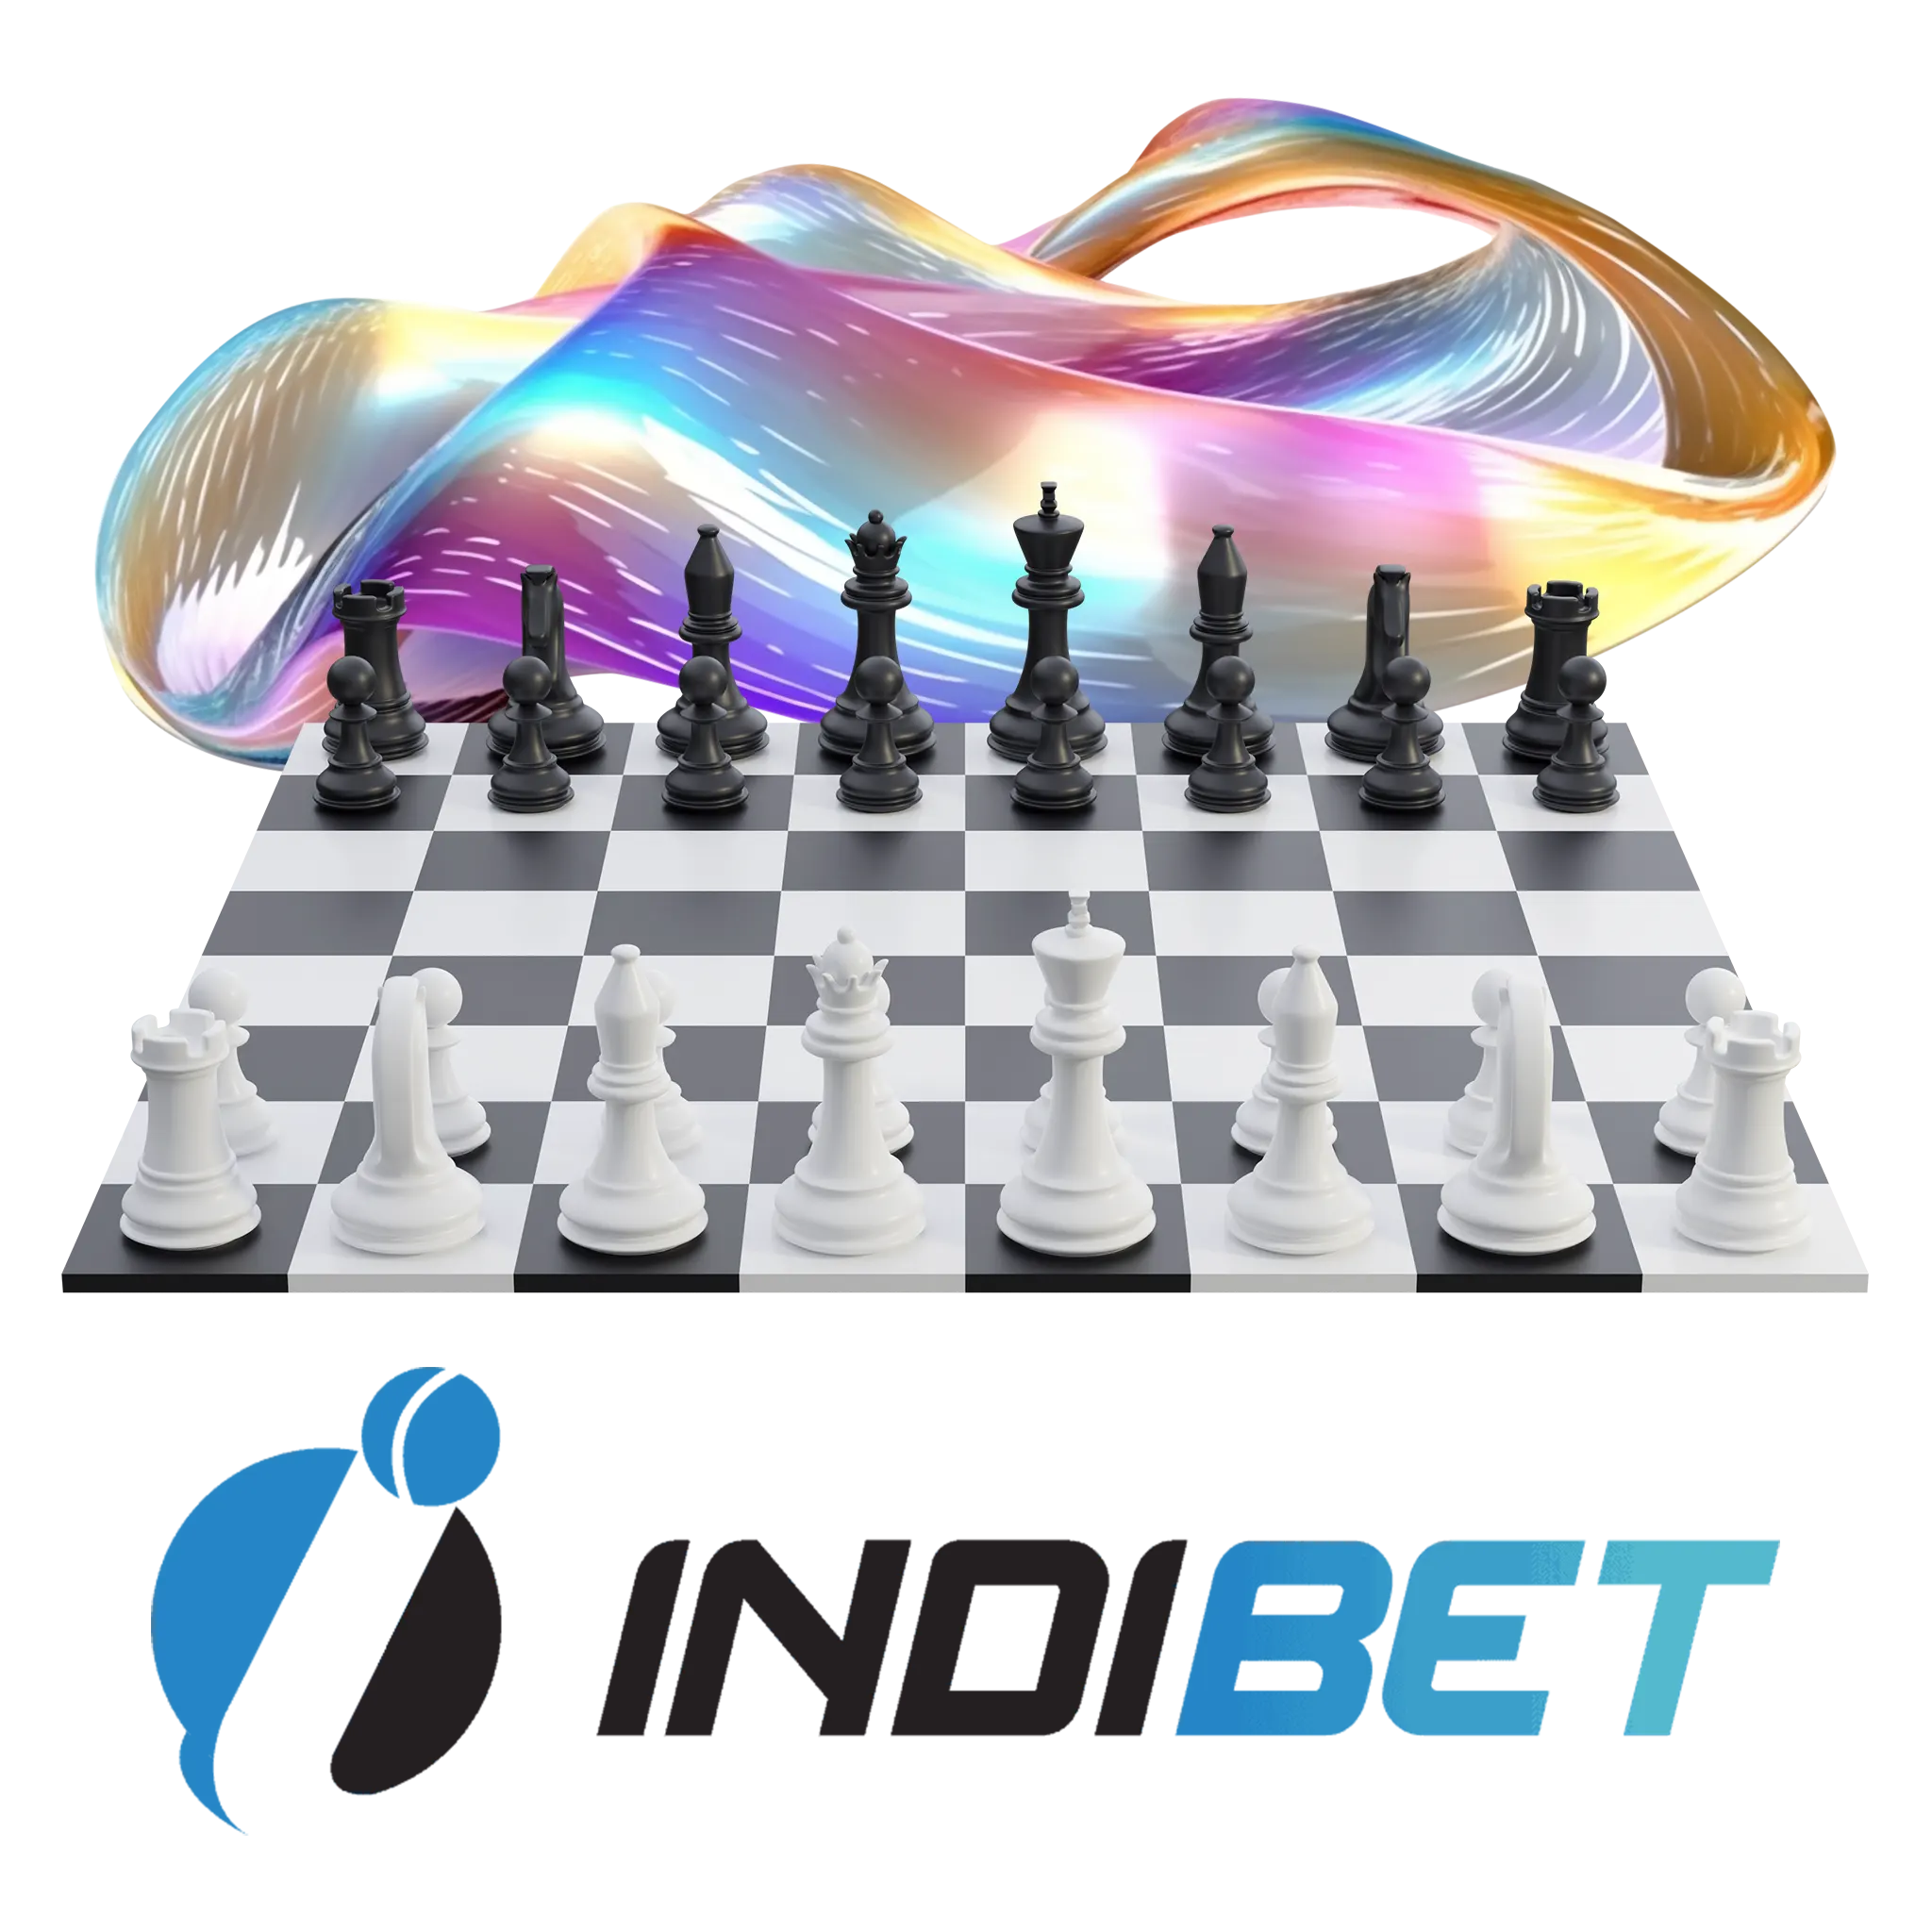 Start betting on chess games online with Indibet!